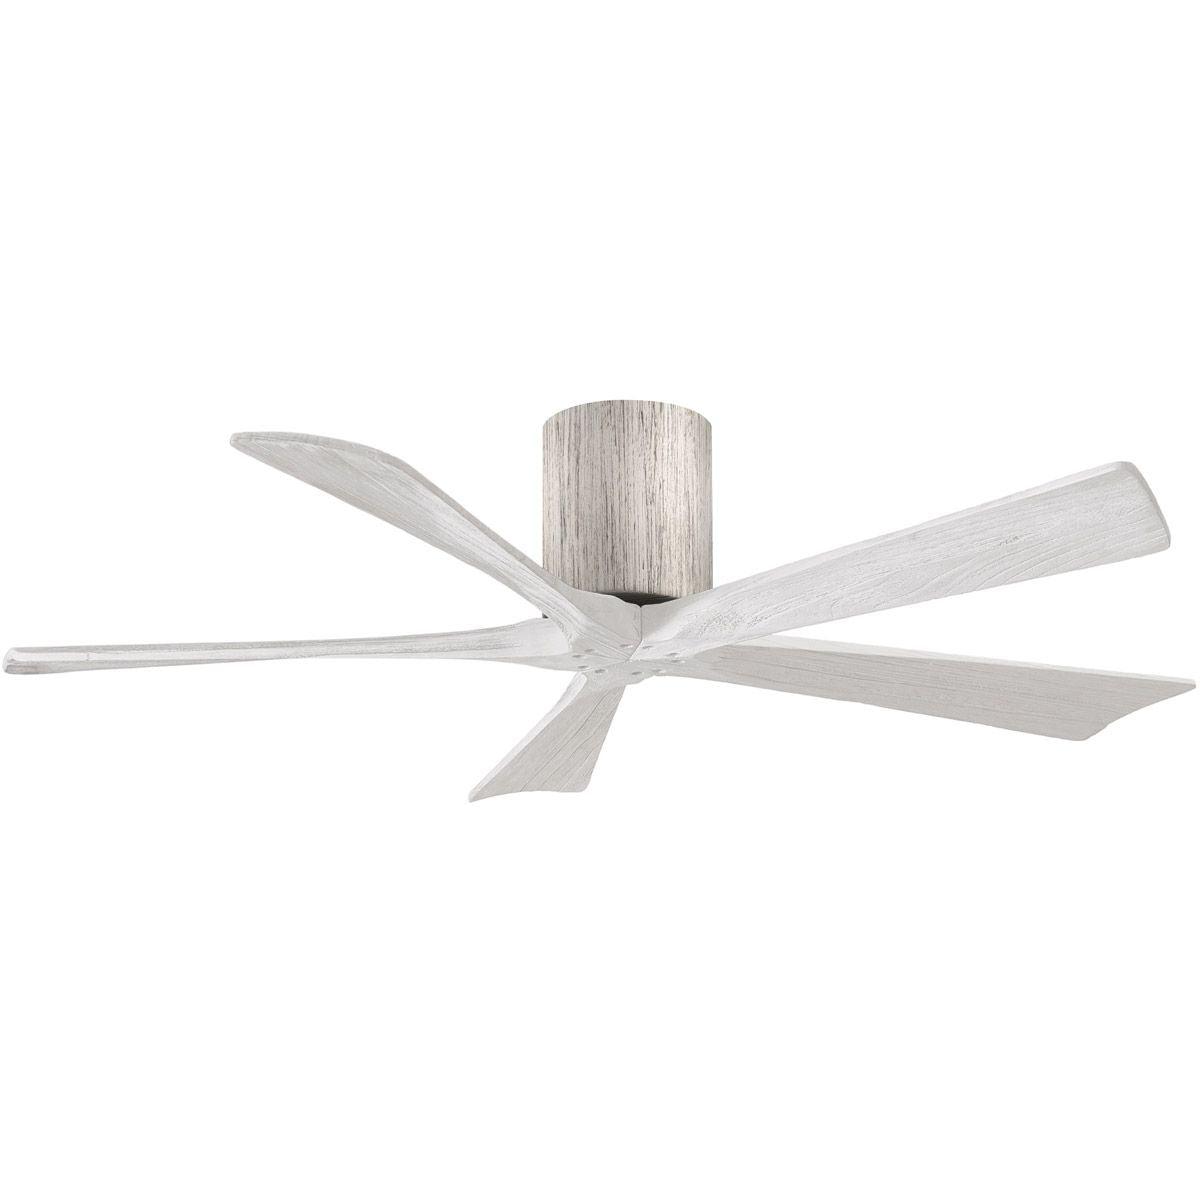 Irene 52 Inch 5 Blades Outdoor Low Profile Ceiling Fan With Remote And Wall Control